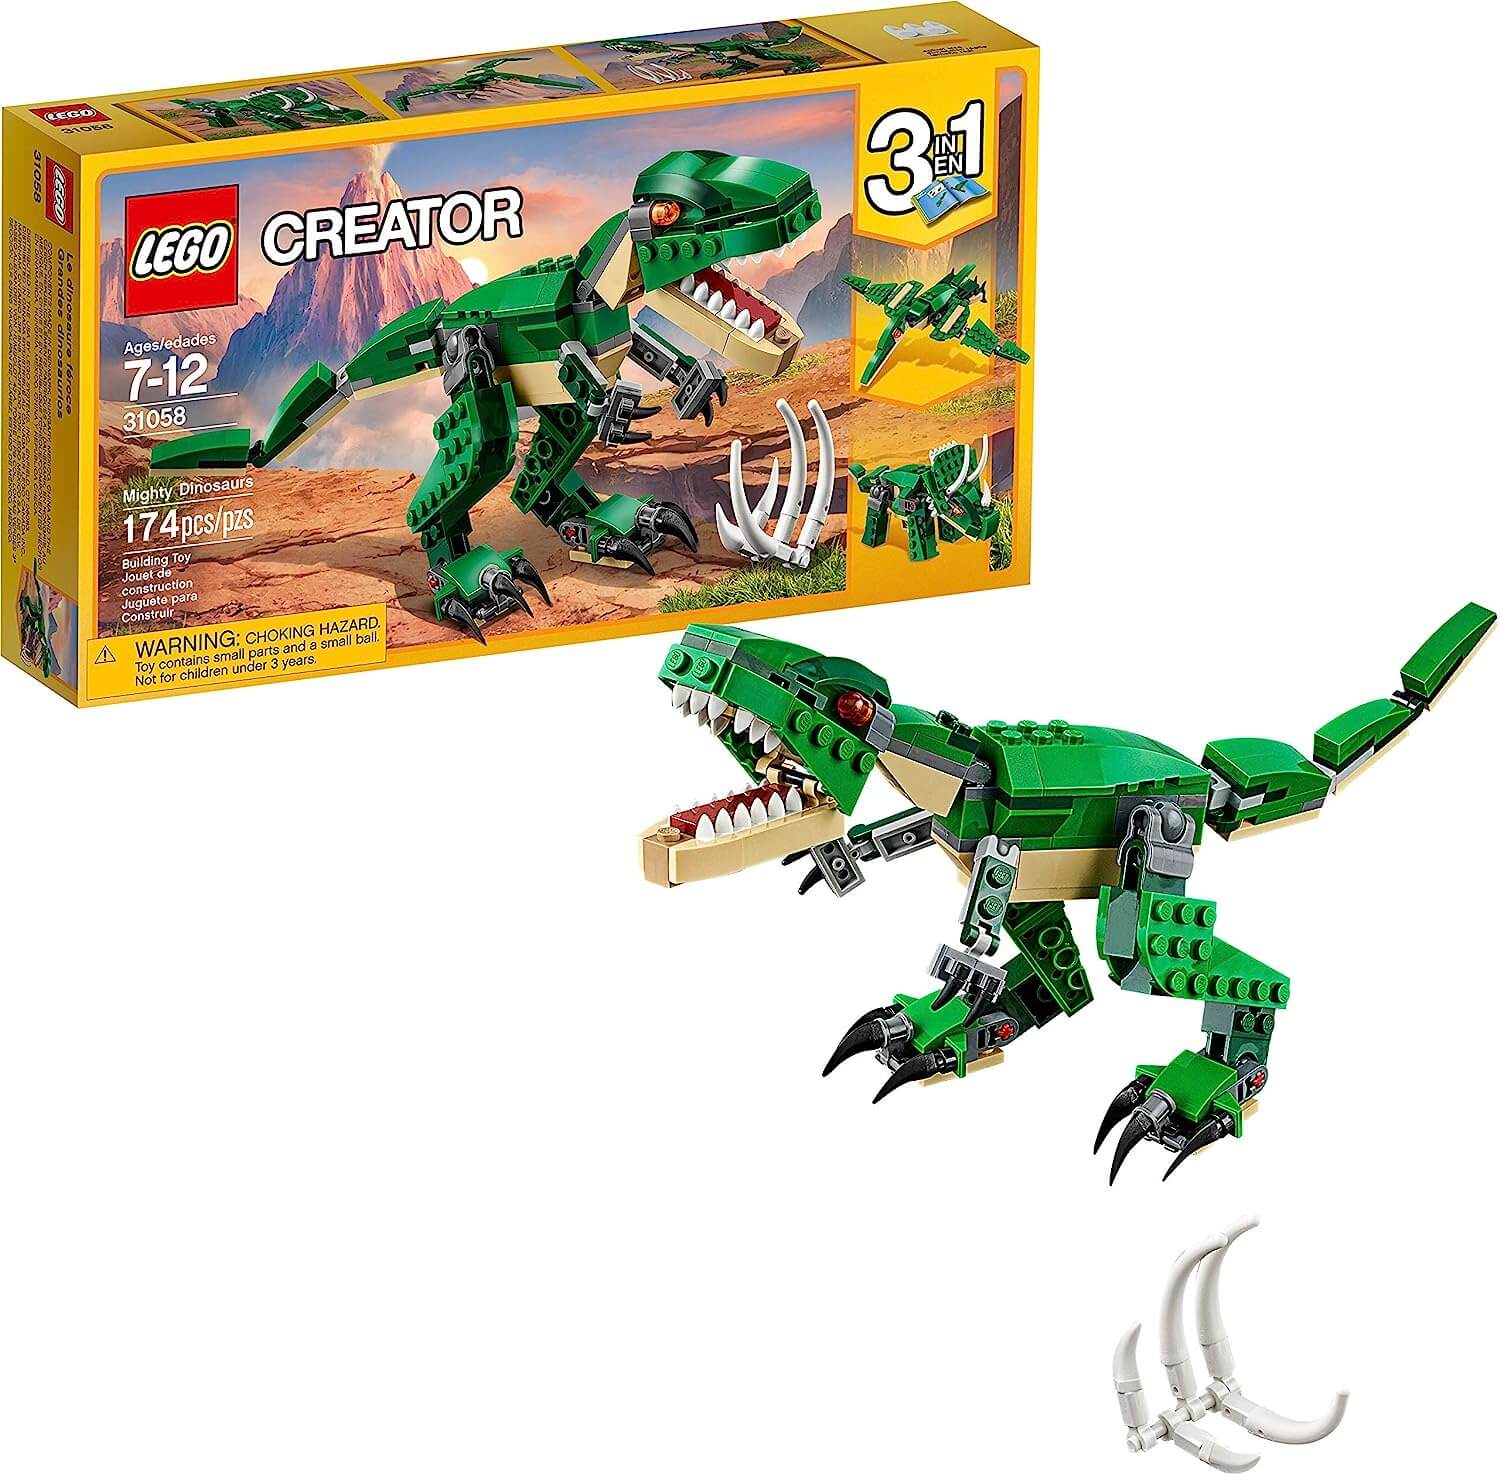 LEGO 3-in-1 Creator Mighty Dinosaurs Set